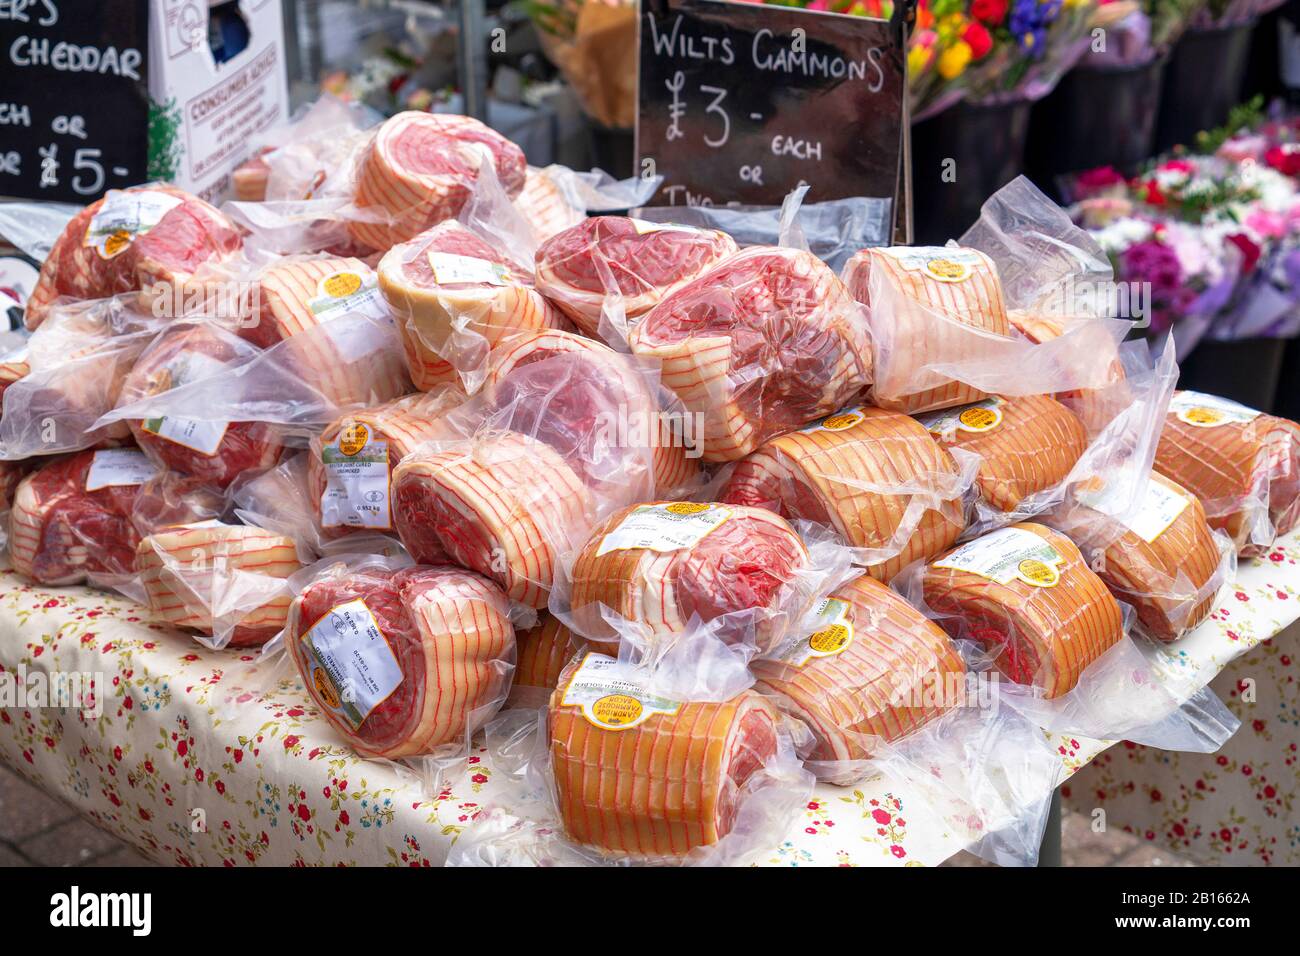 Shrink wrapped gammon bacon joints piled up on outdoor market stall table Stock Photo